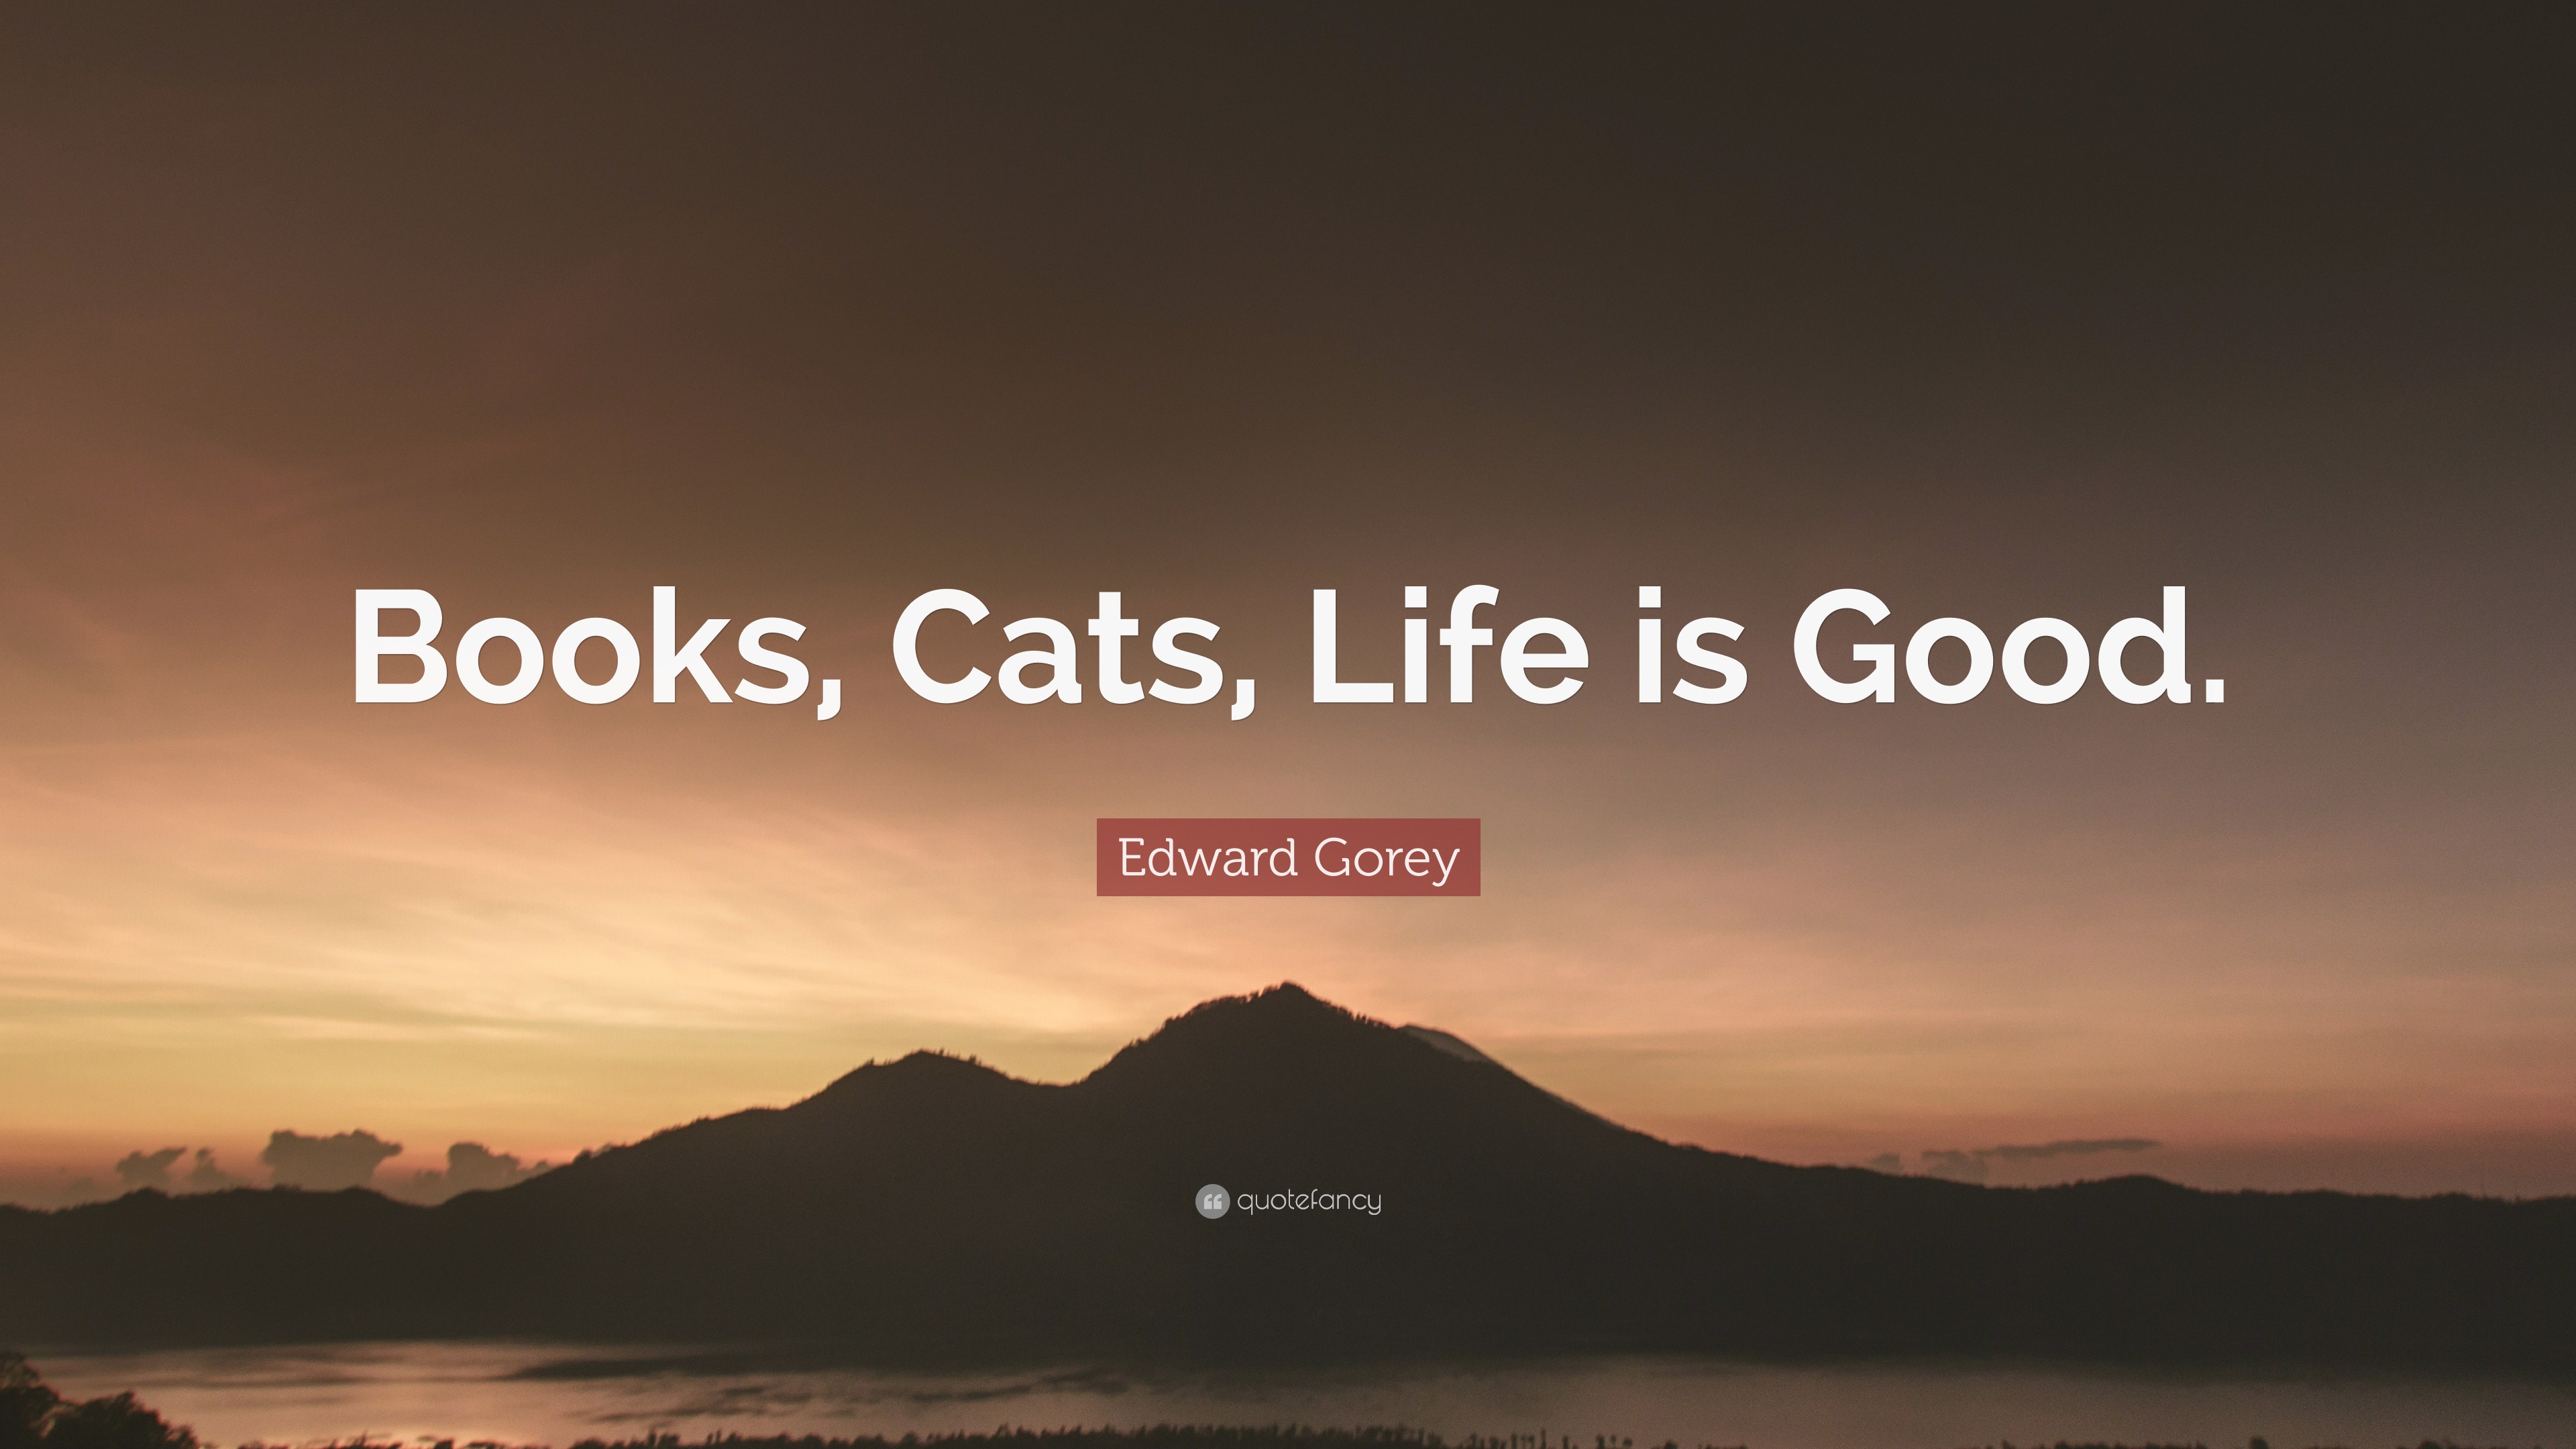 quotes life is good edward gorey quote u201cbooks cats life is good u201d 11 wallpapers